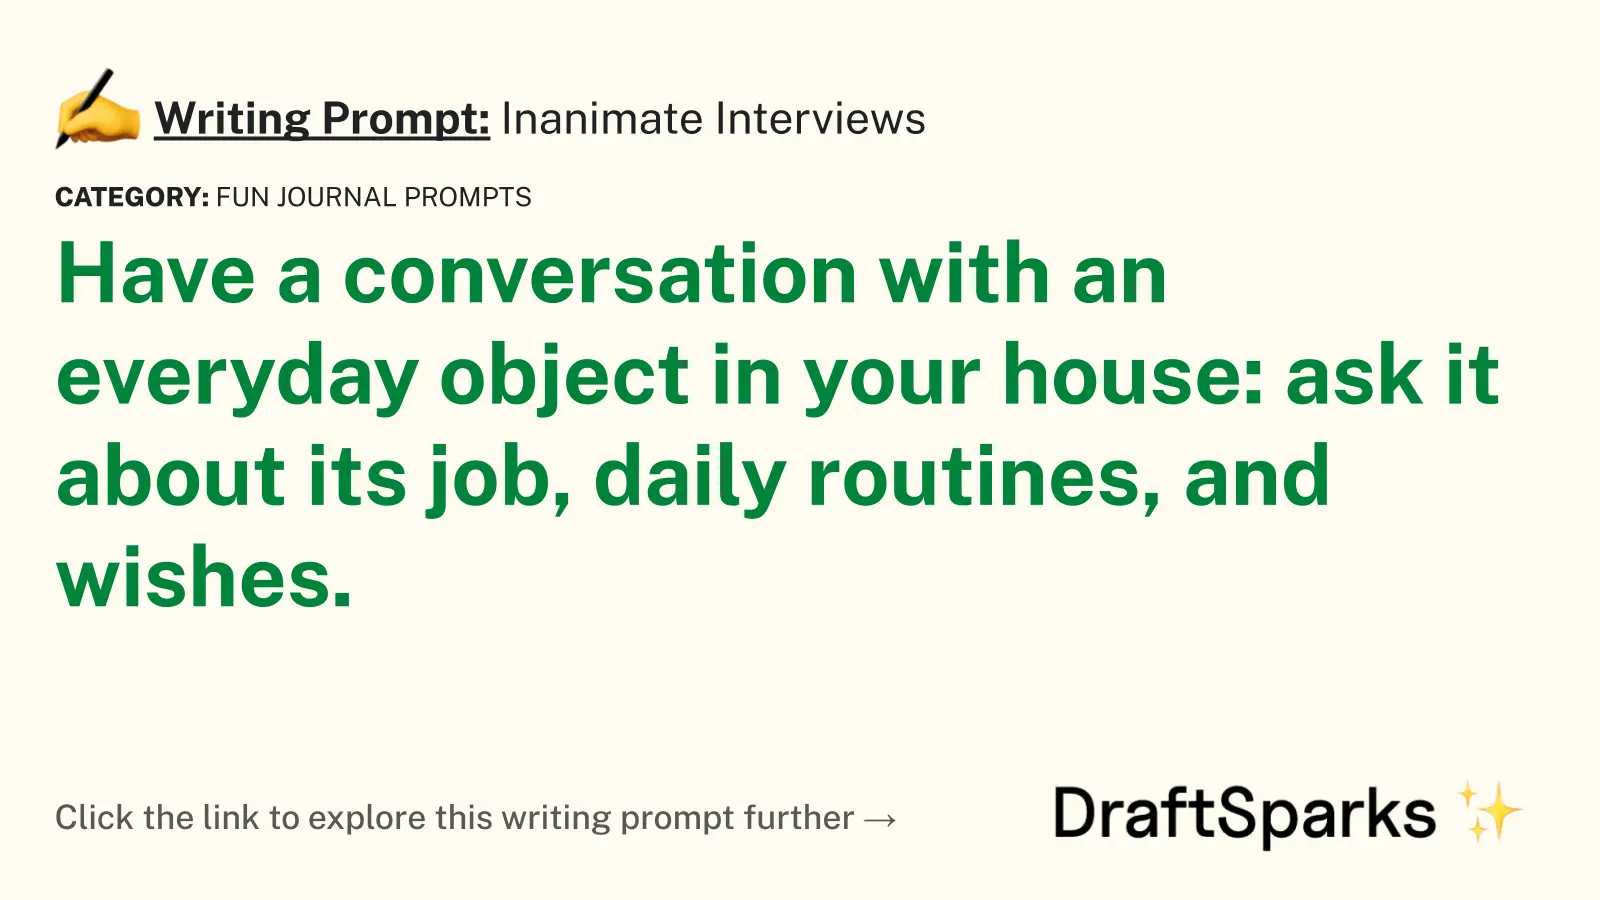 Inanimate Interviews